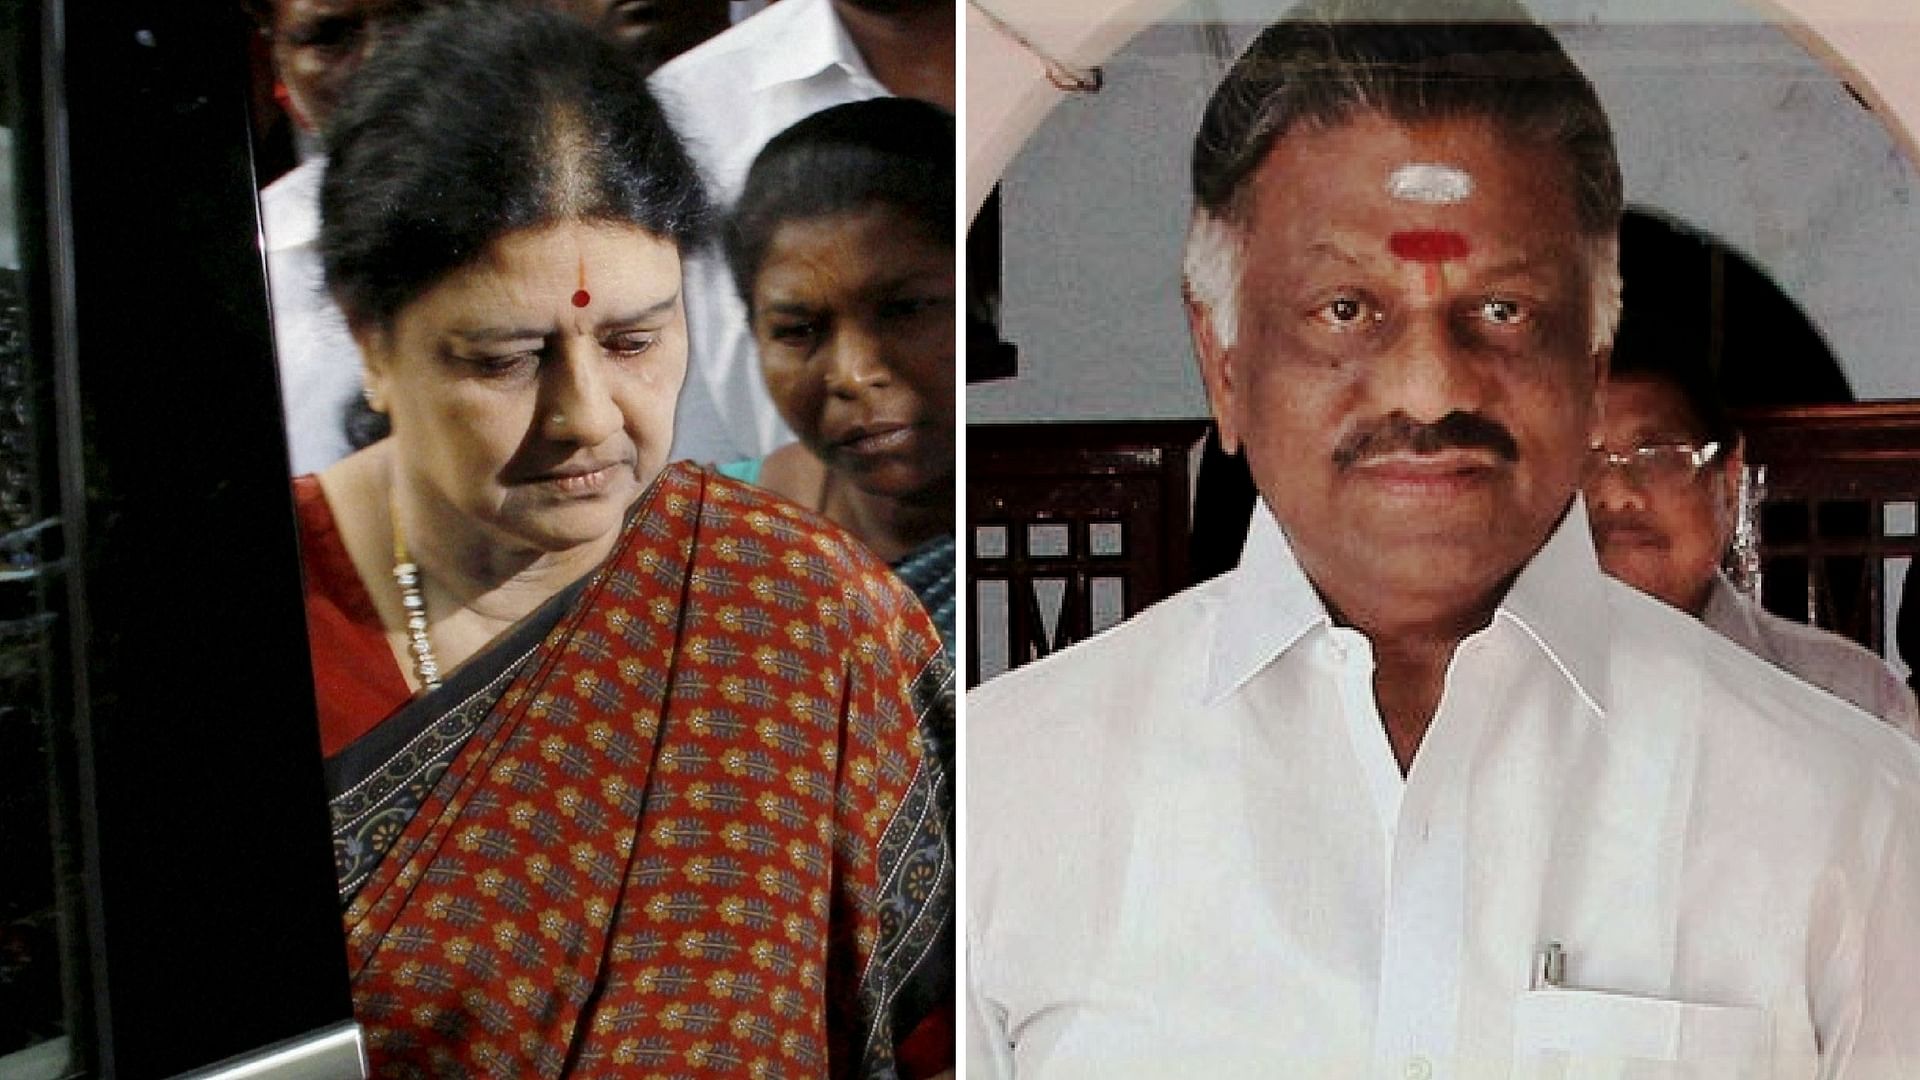 The Sasikala versus OPS battle rages on social media as well. (Photo: <b>The Quint</b>)